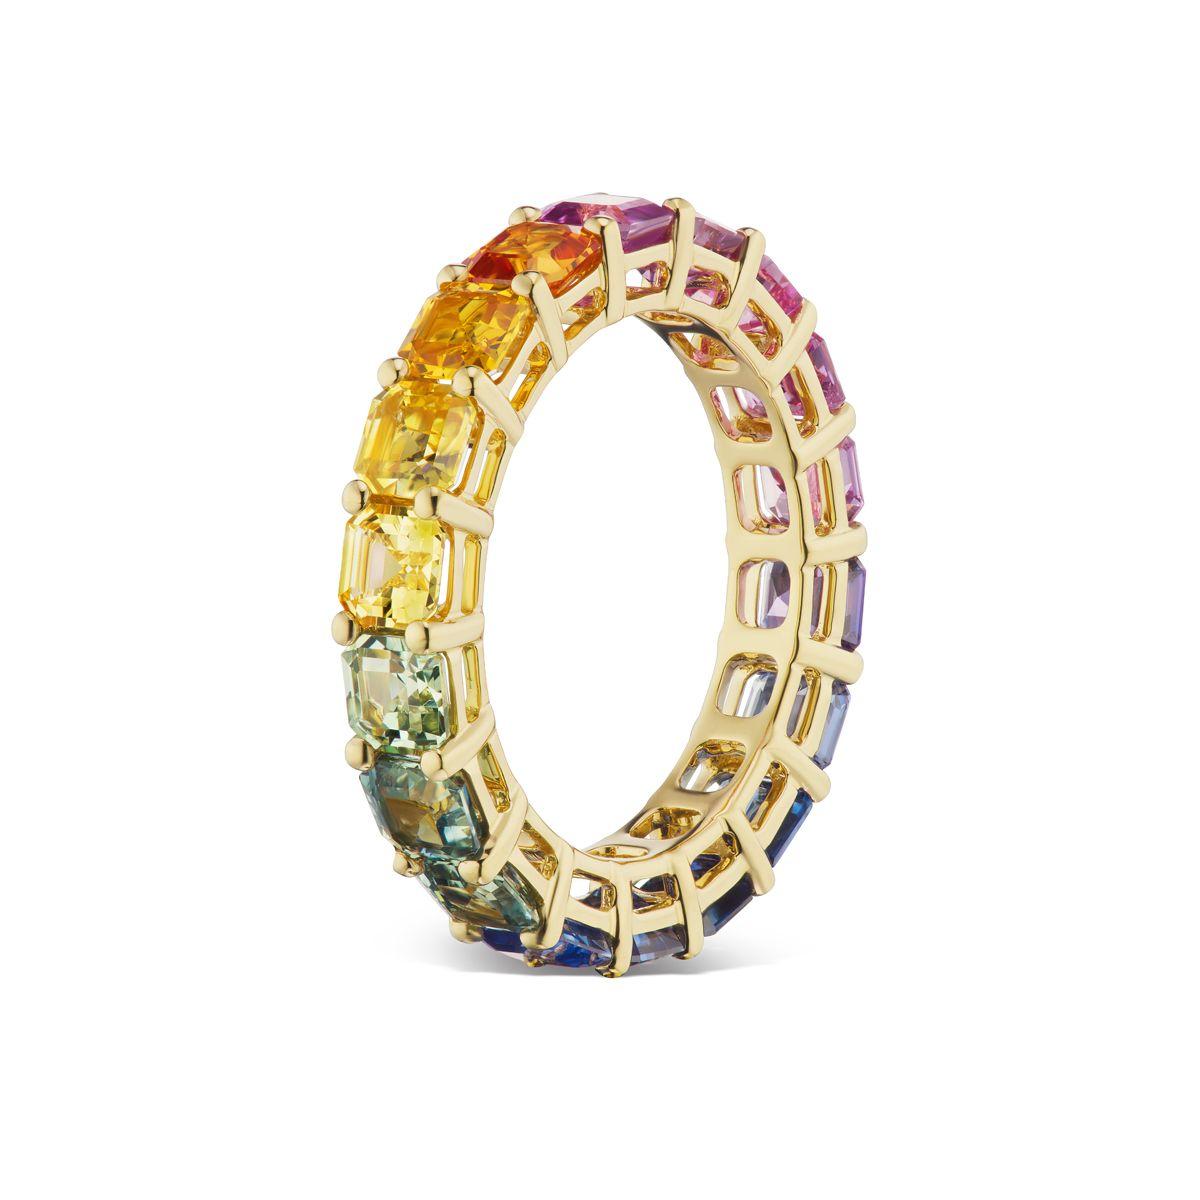 18k Yellow Gold 5.54ct Natural Color Sapphire Eternity Band

Gorgeous Multi-Colored Fancy Sapphire Eternity Band. A funky ring for
women. ( Ring Size 6.5 )
Item: # 03791
Metal: 18k Y
Color Weight: 5.54 ct